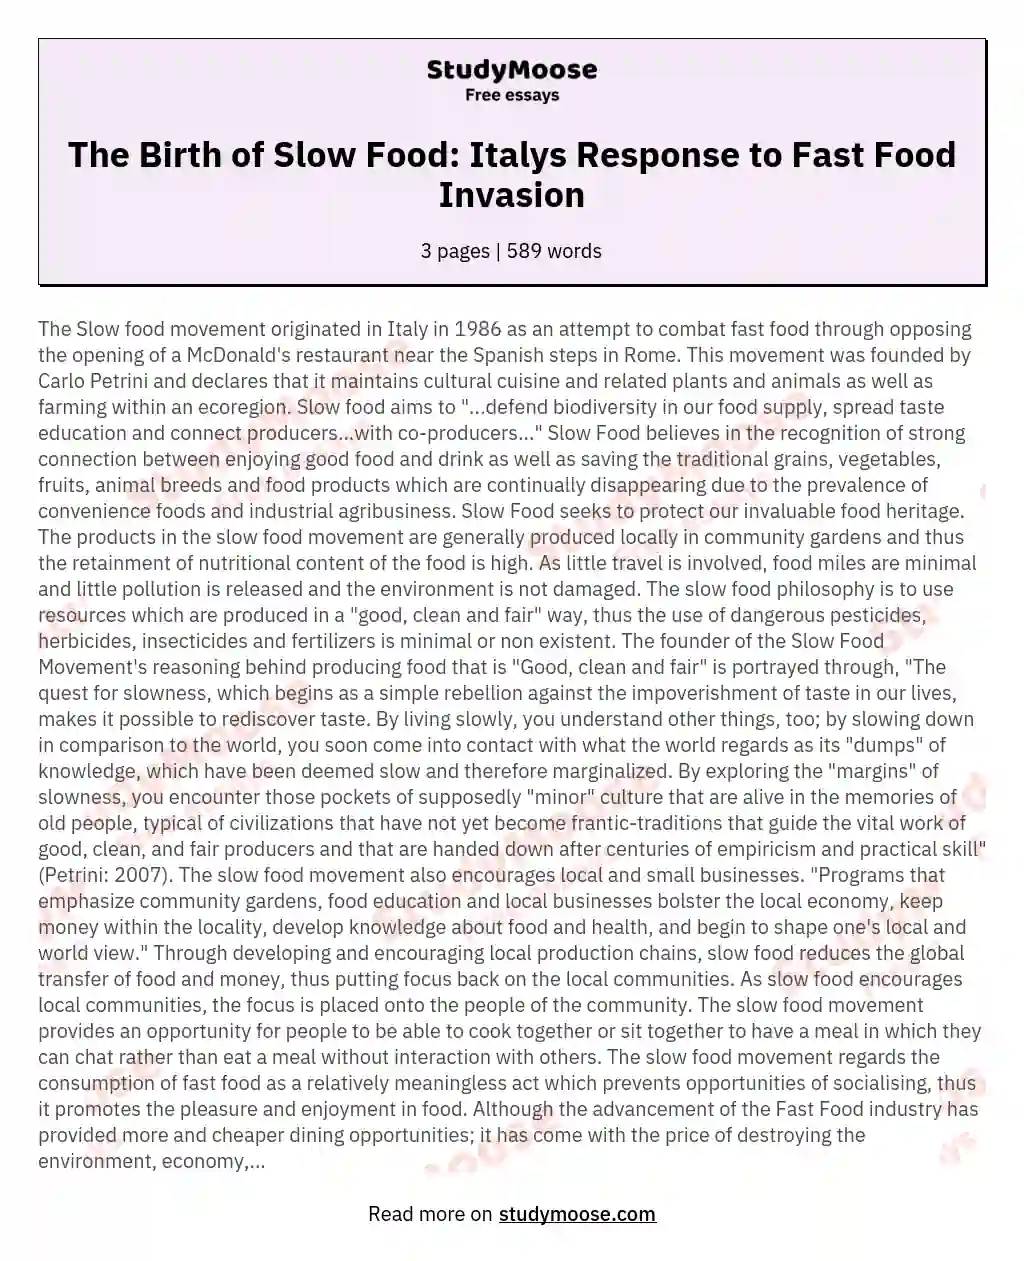 The Birth of Slow Food: Italys Response to Fast Food Invasion essay